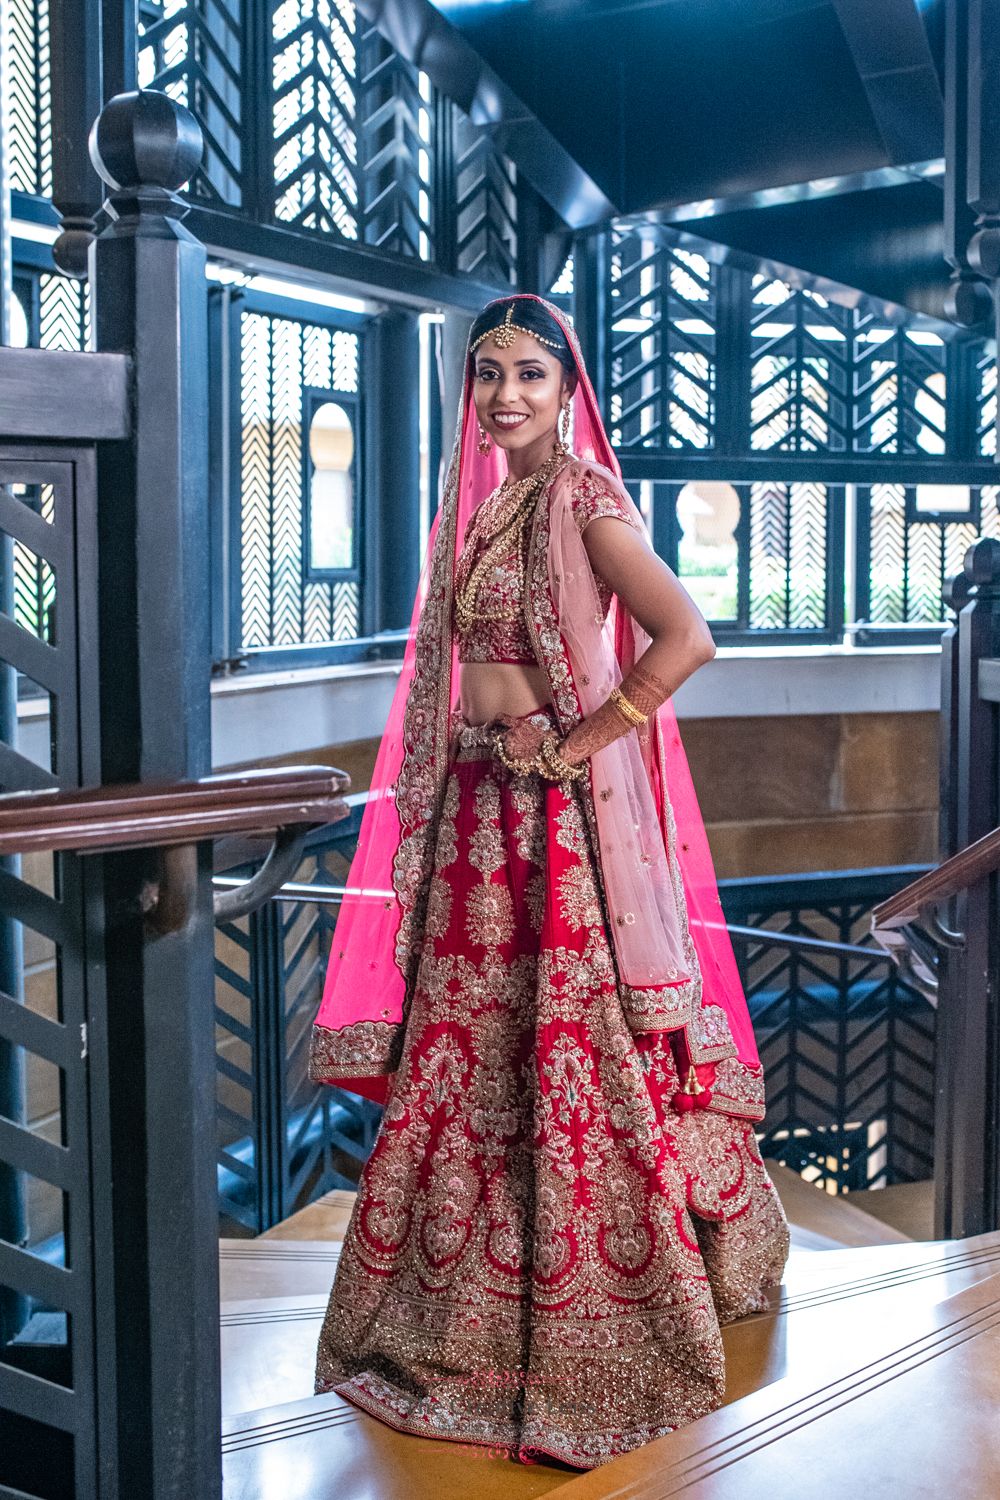 Photo of A bride in red lehenga with double dupatta